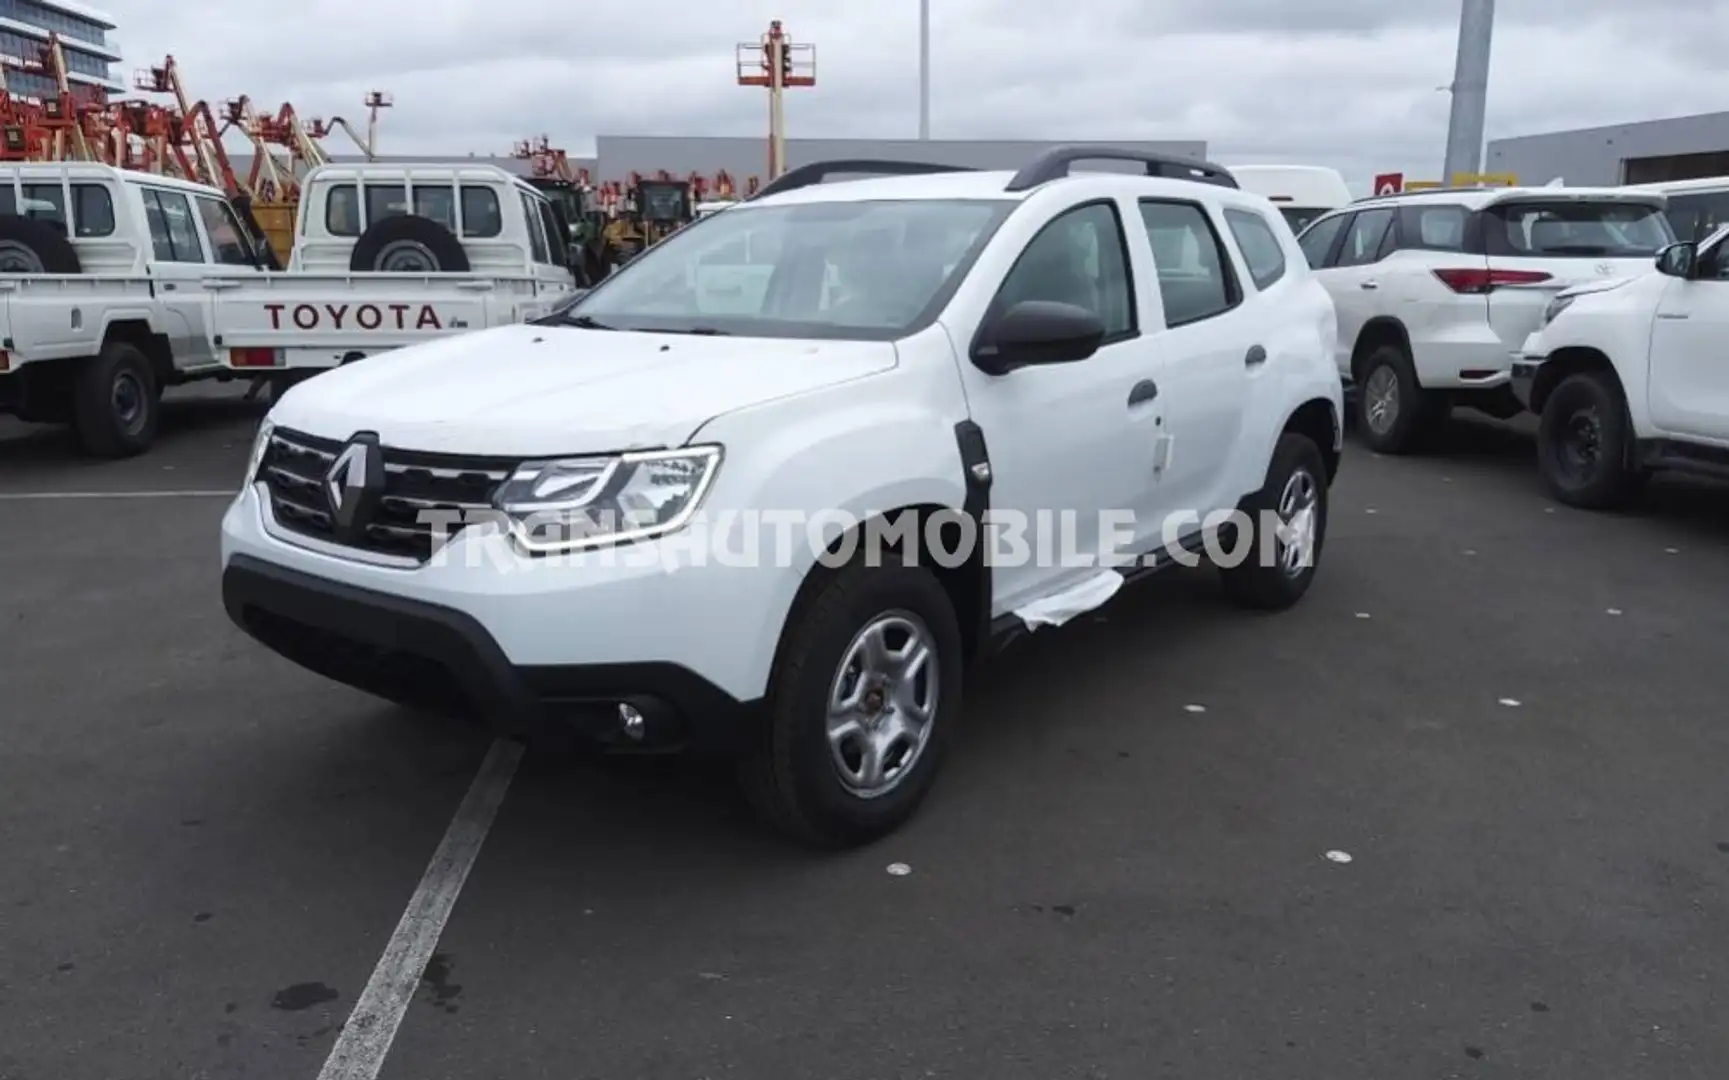 Renault Duster Standard - EXPORT OUT EU TROPICAL VERSION - EXPORT Weiß - 1